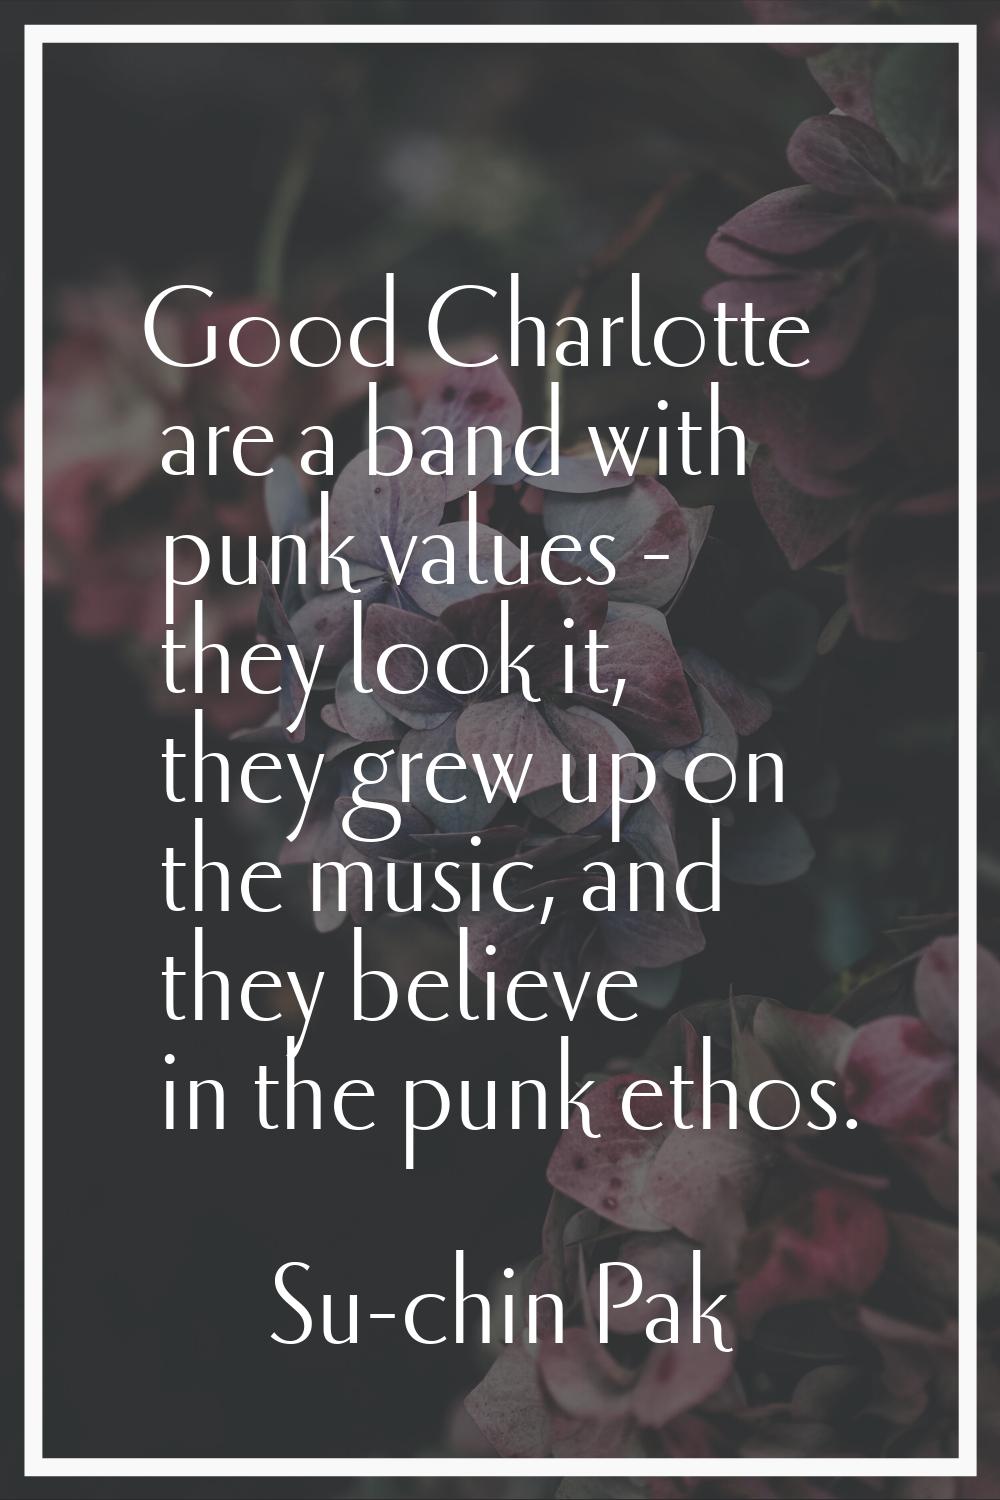 Good Charlotte are a band with punk values - they look it, they grew up on the music, and they beli